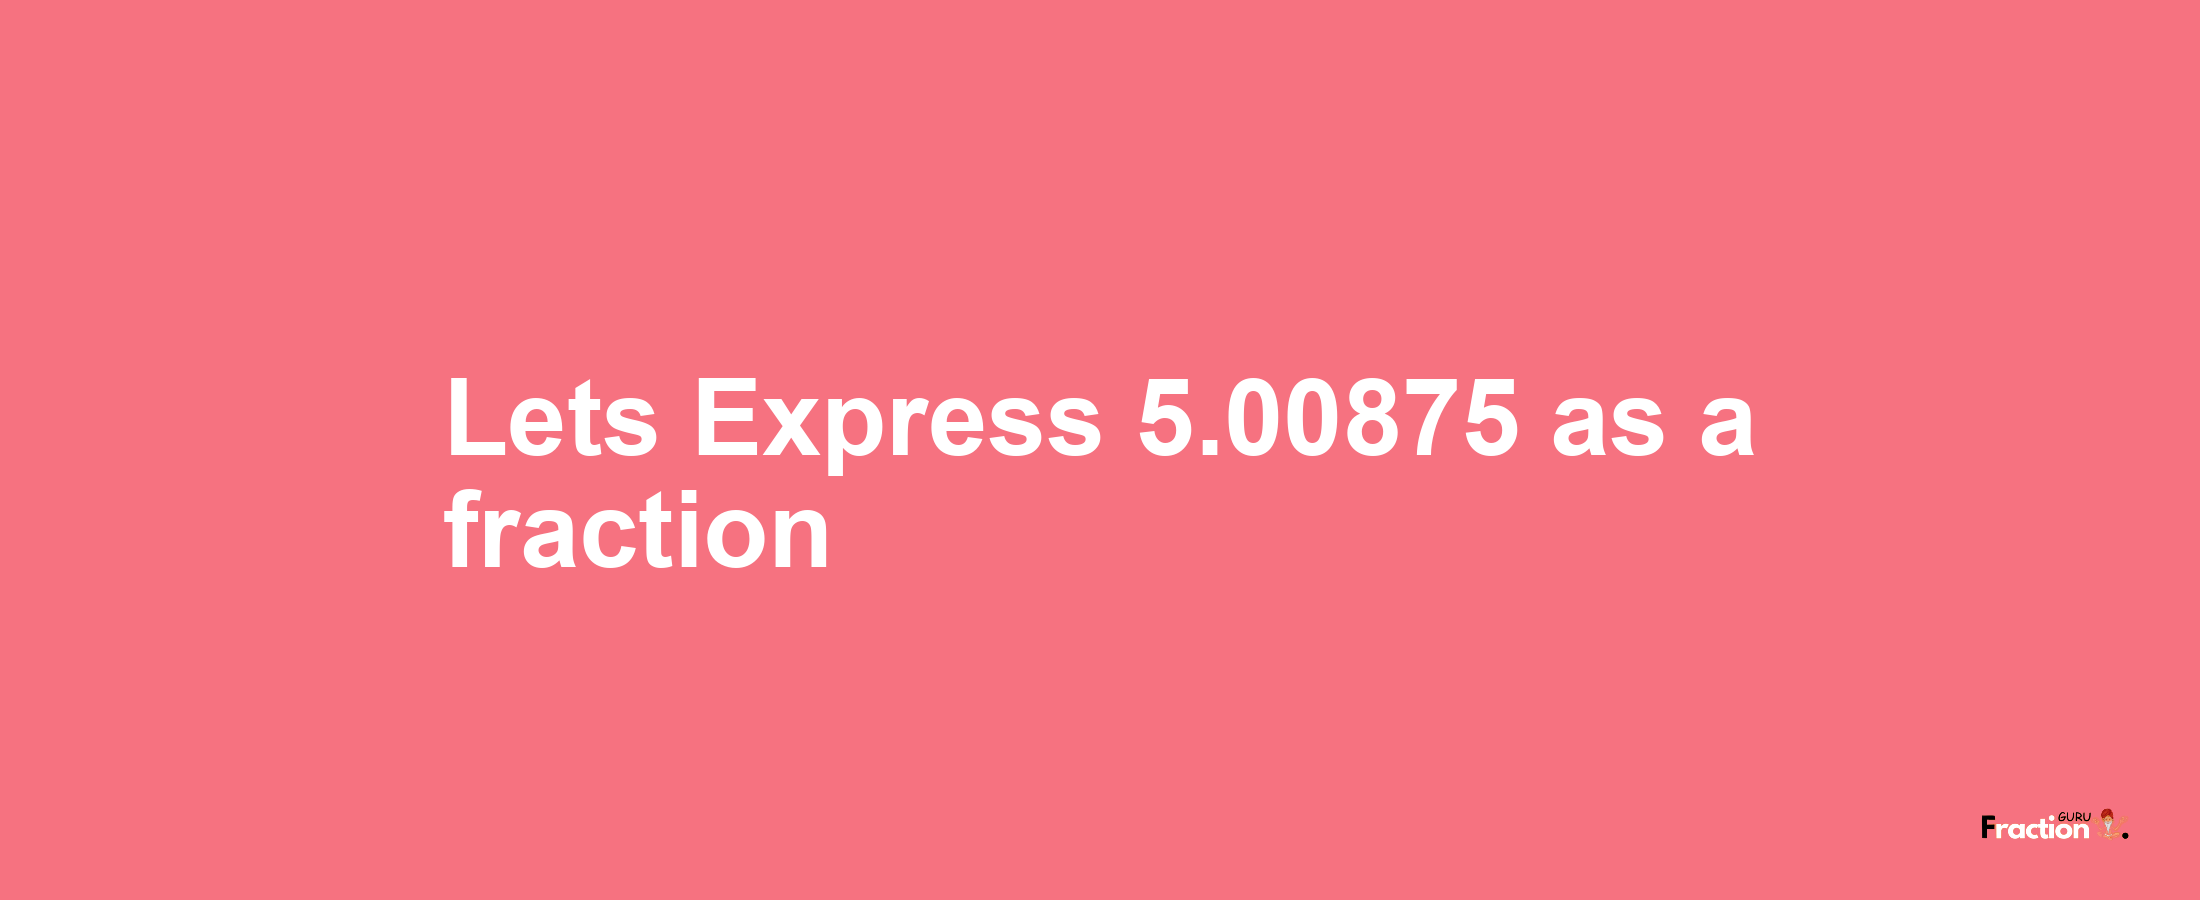 Lets Express 5.00875 as afraction